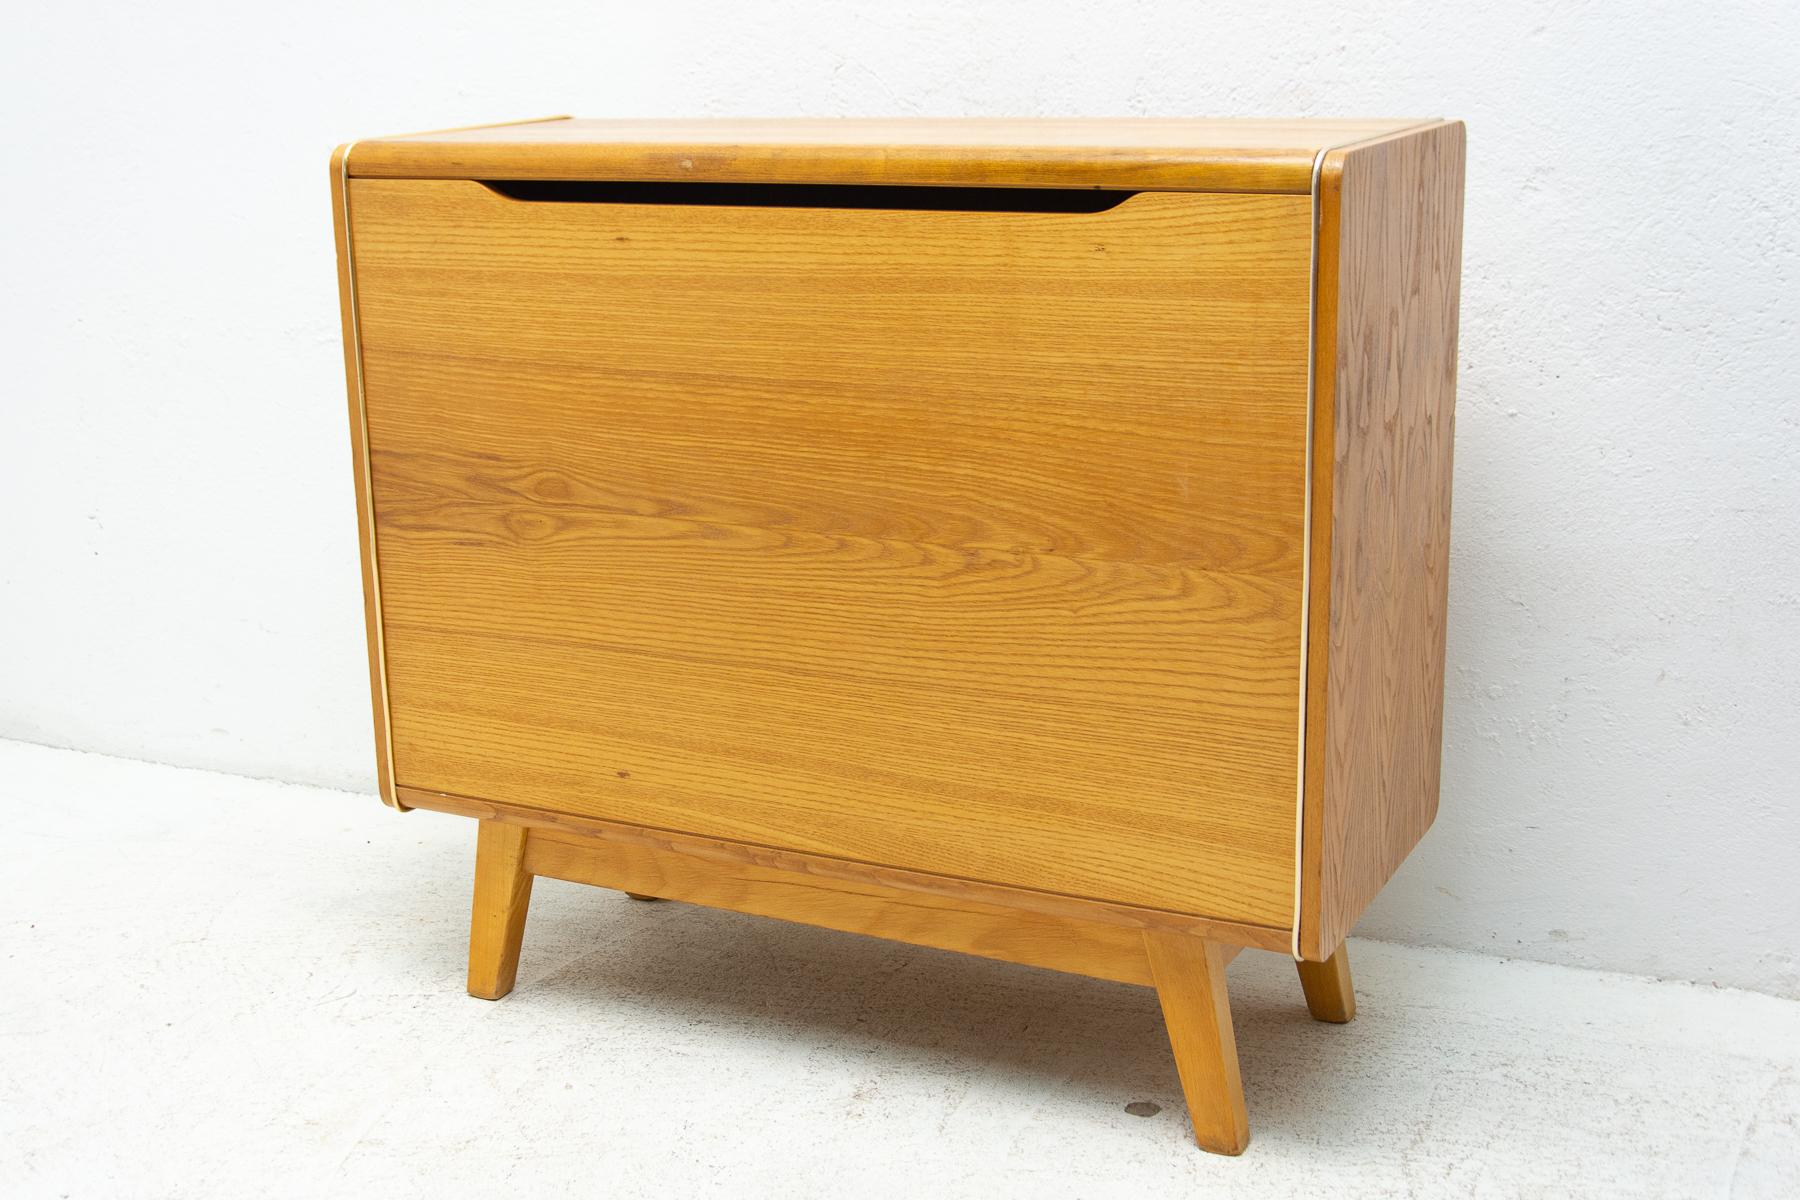 Mid-Century Modern dresser by Bohumil Landsman for Jitona. Made in the former Czechoslovakia during the 1960s. The dresser is a part of living set. The furniture is primarily intended as a dresser, but it can also be used as a TV cabinet and the